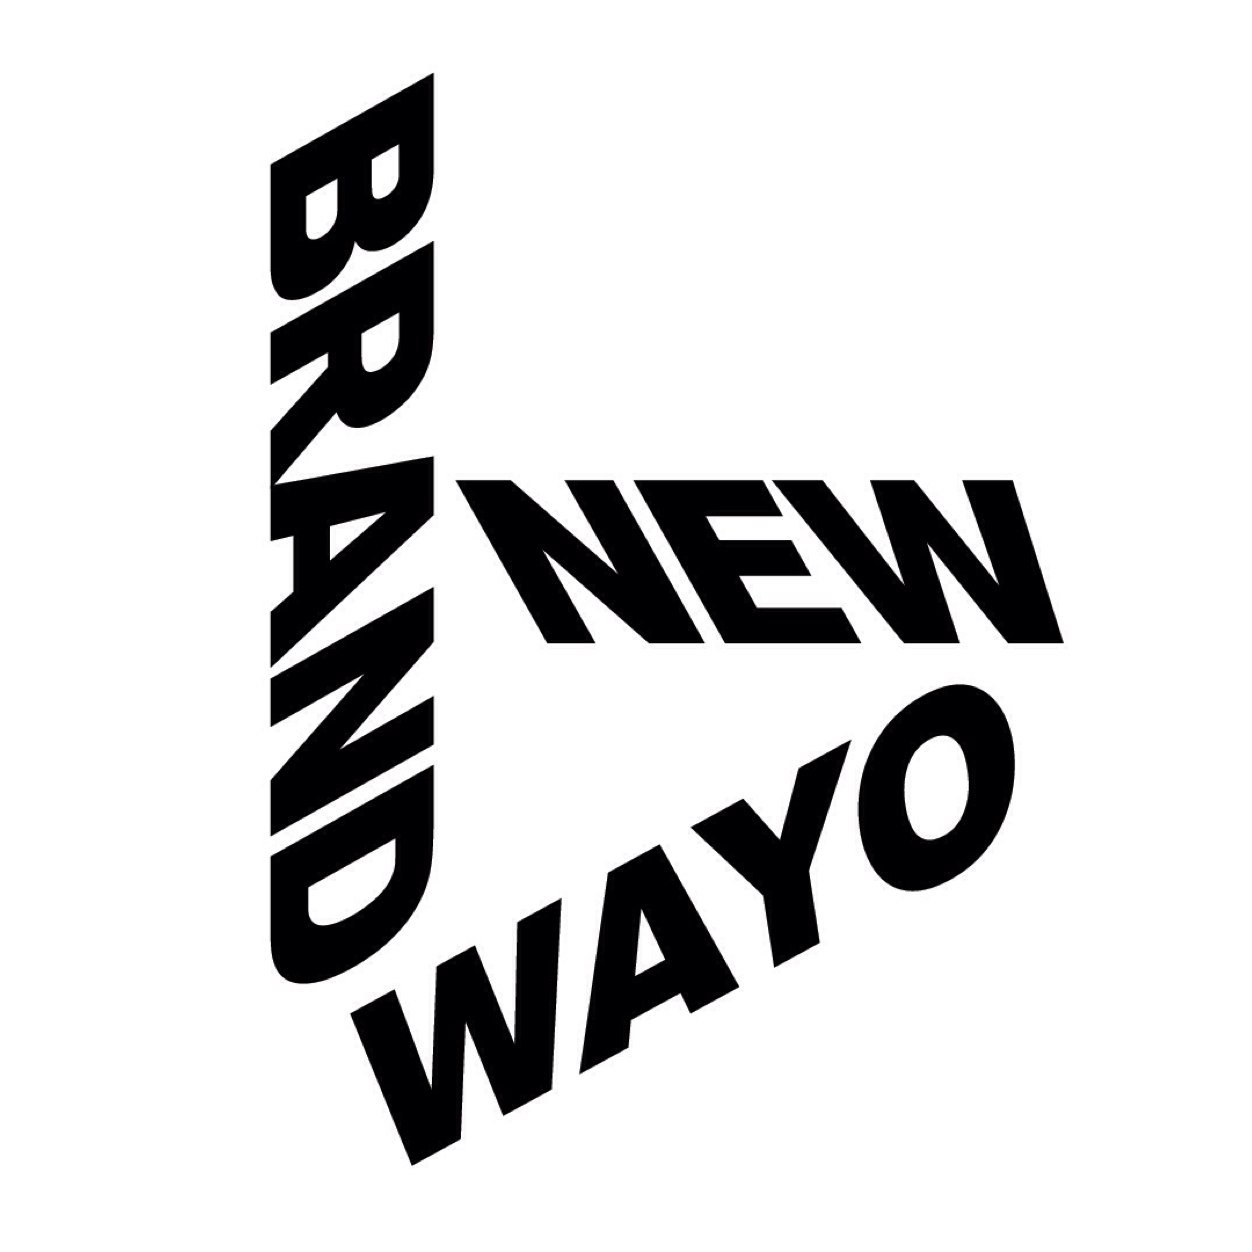 Bringing up front music from new artists alongside obscure records from decades past, Brand New Wayo will take you on a trip.

LDN • Globalcentric